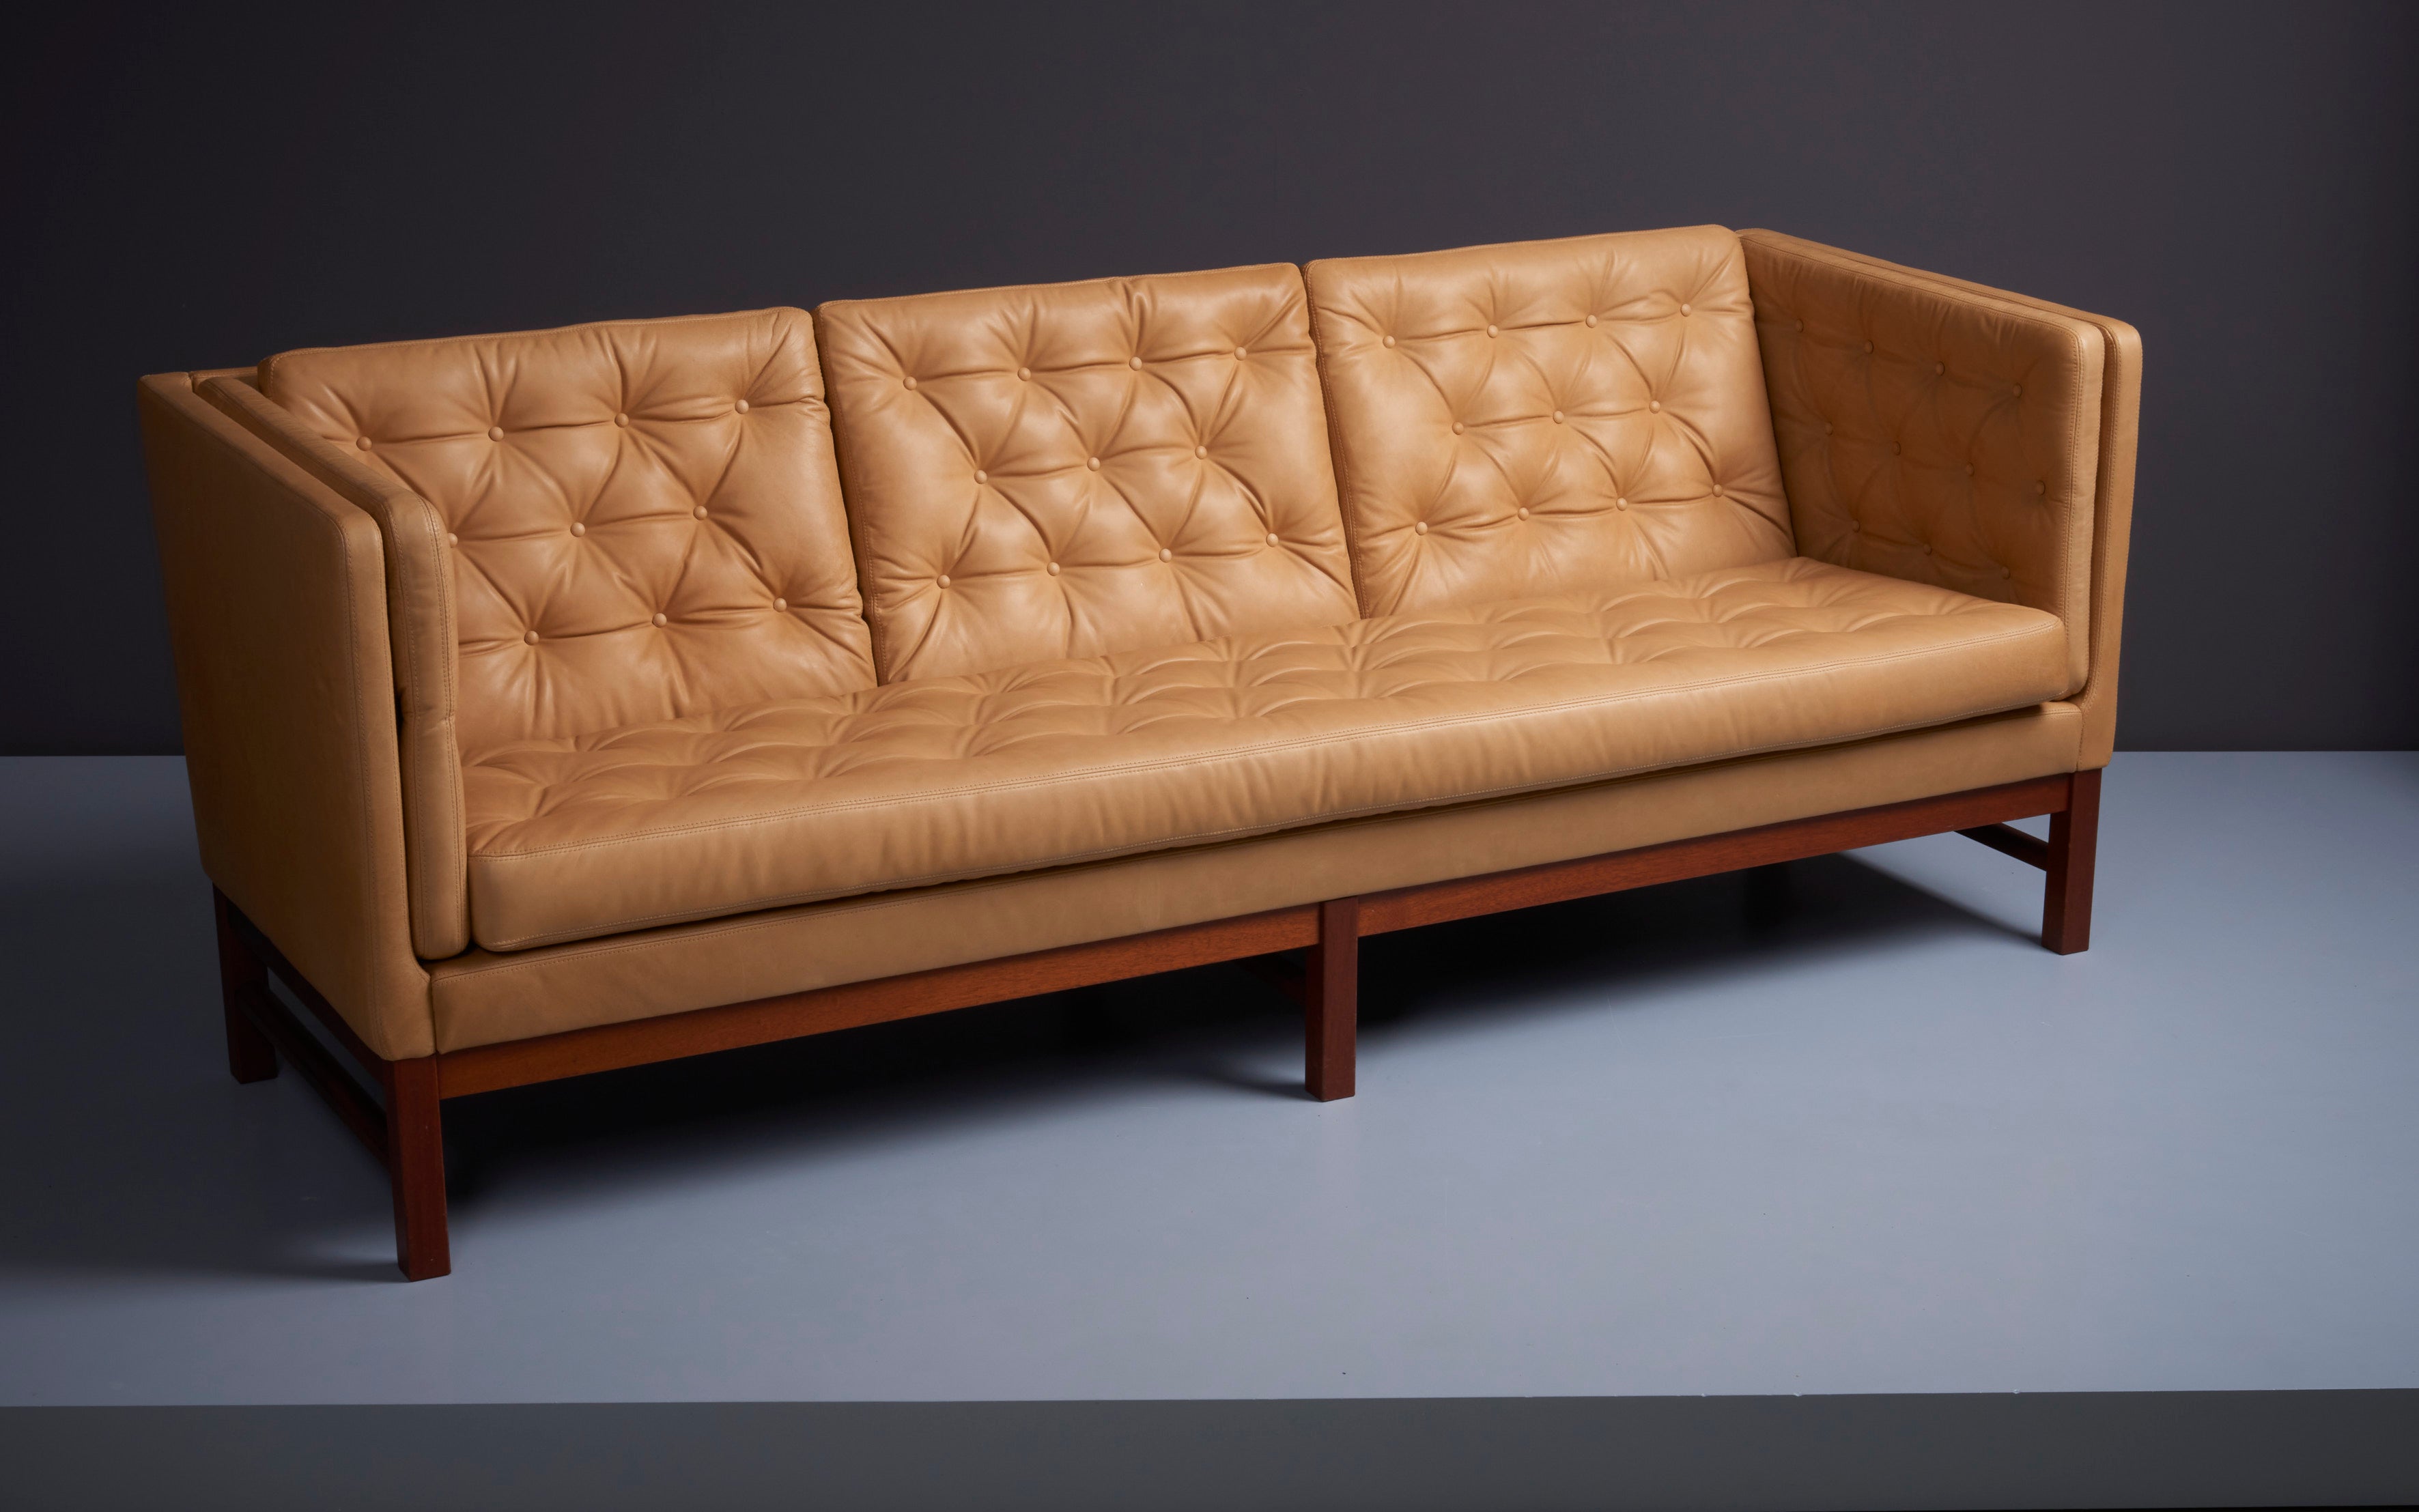 Erik Ole Jørgensen EJ315 Leather Sofa, newly upholstered in aniline camoleather with Teak Frame. Designed in the 1970s, Denmark. This is an early production. 

The EJ315 sofa is a modern Classic design that was created by the Danish furniture